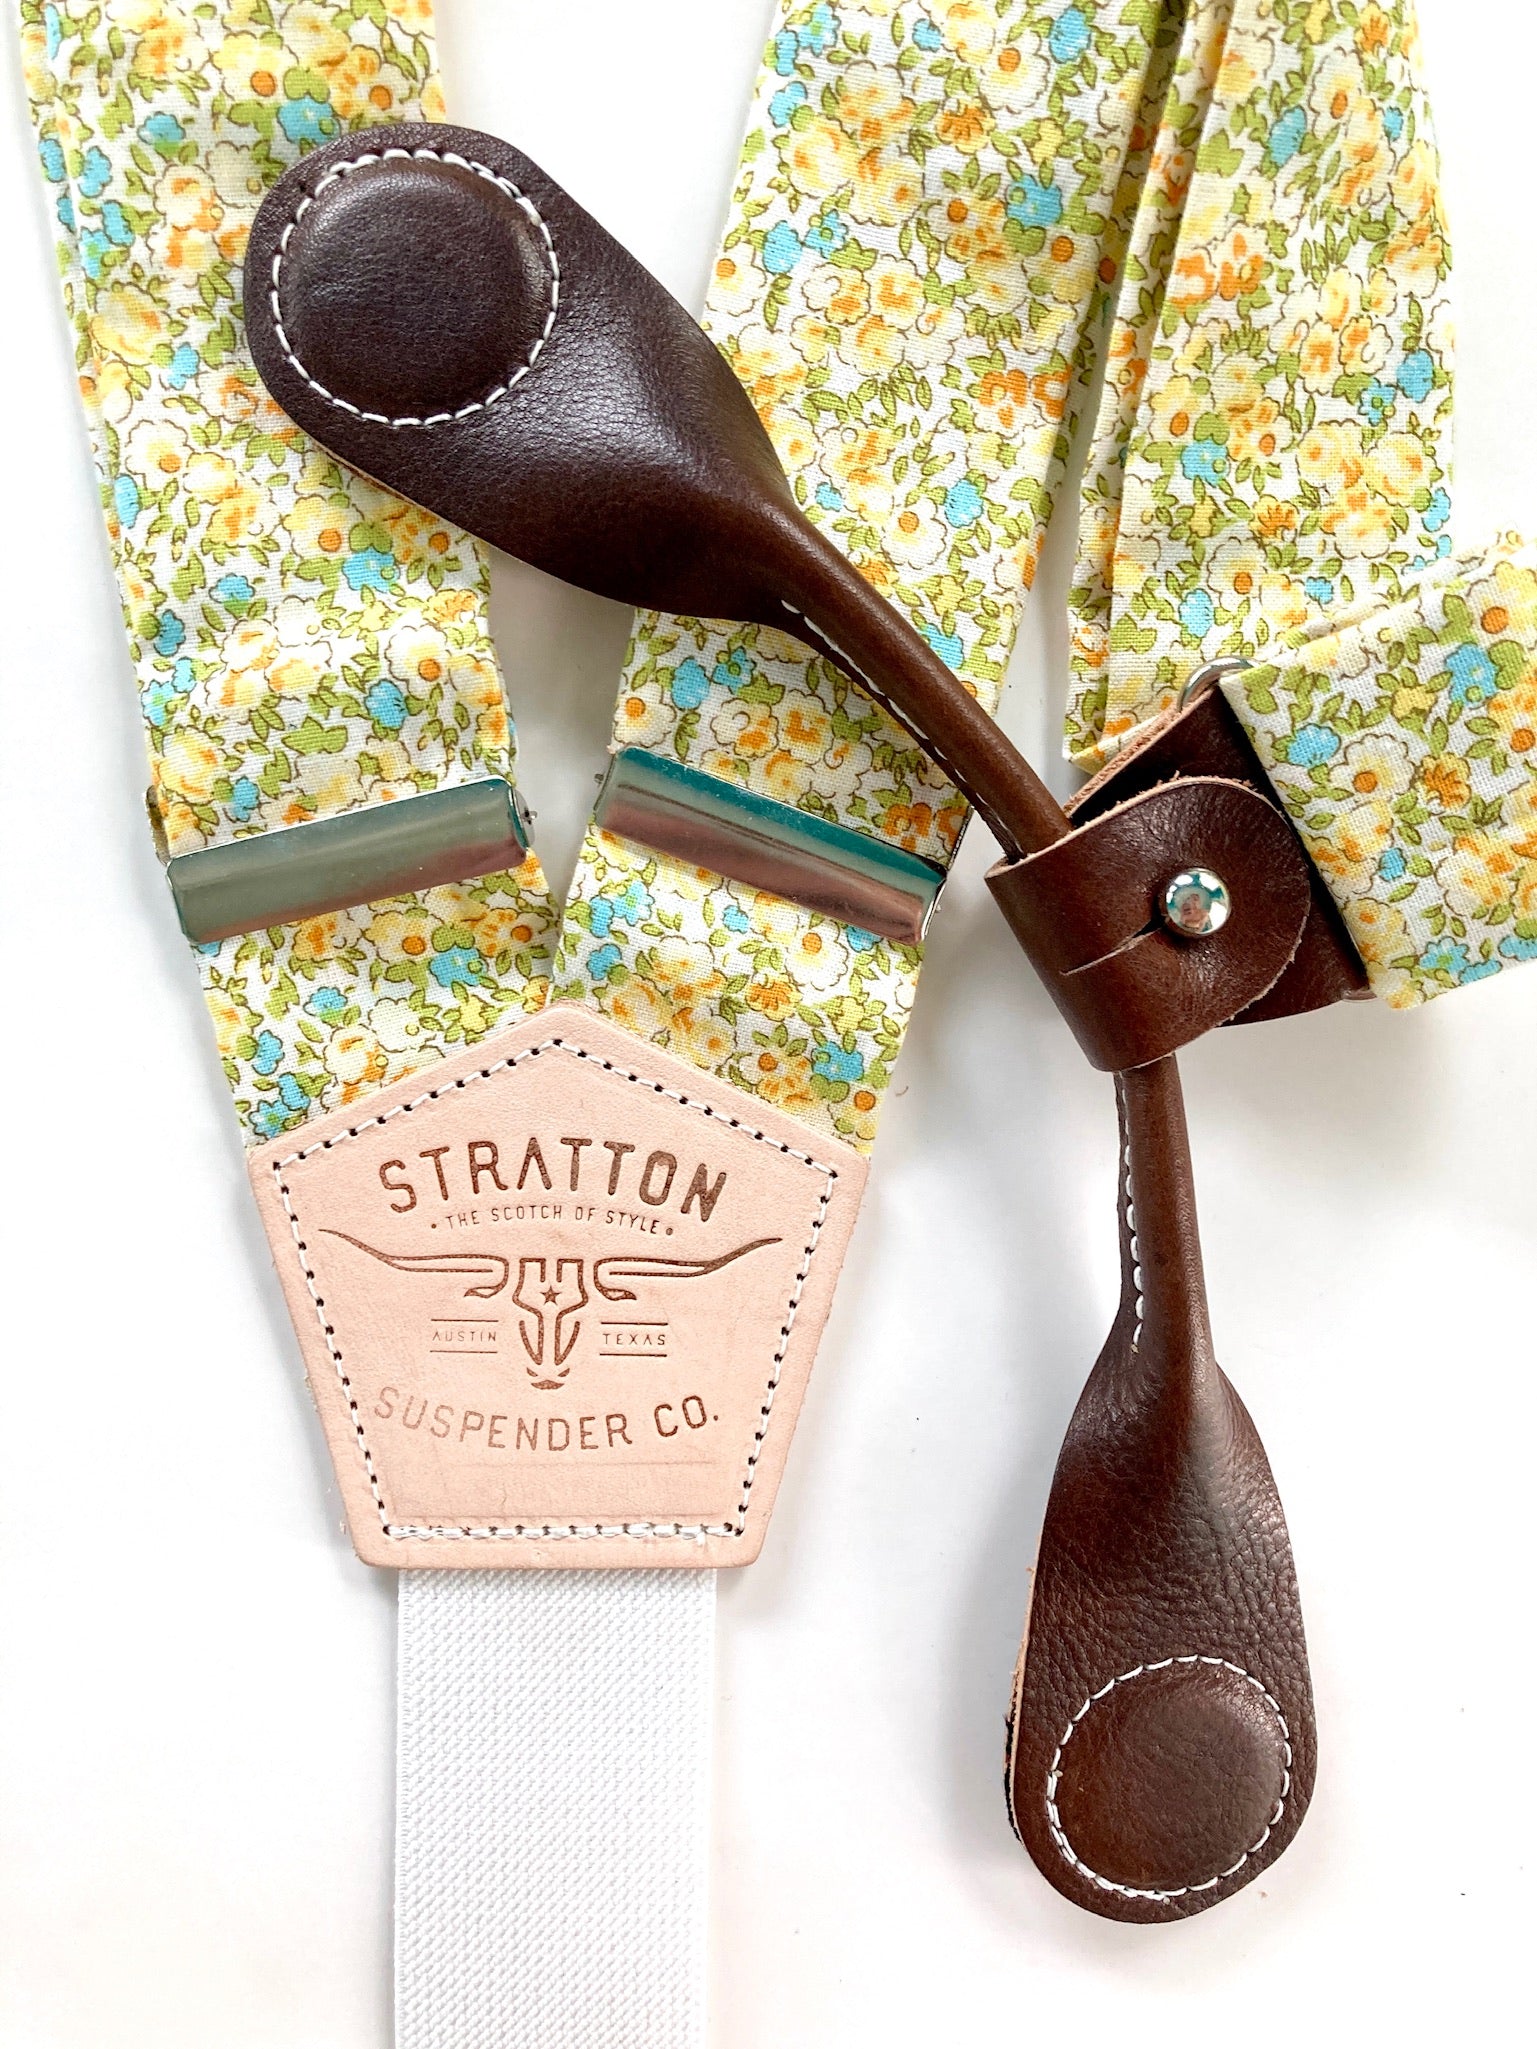 Stratton Suspenders in Summertime Yellow Floral Paired with Chocolate Pontedero Leather Magnetic Clasps